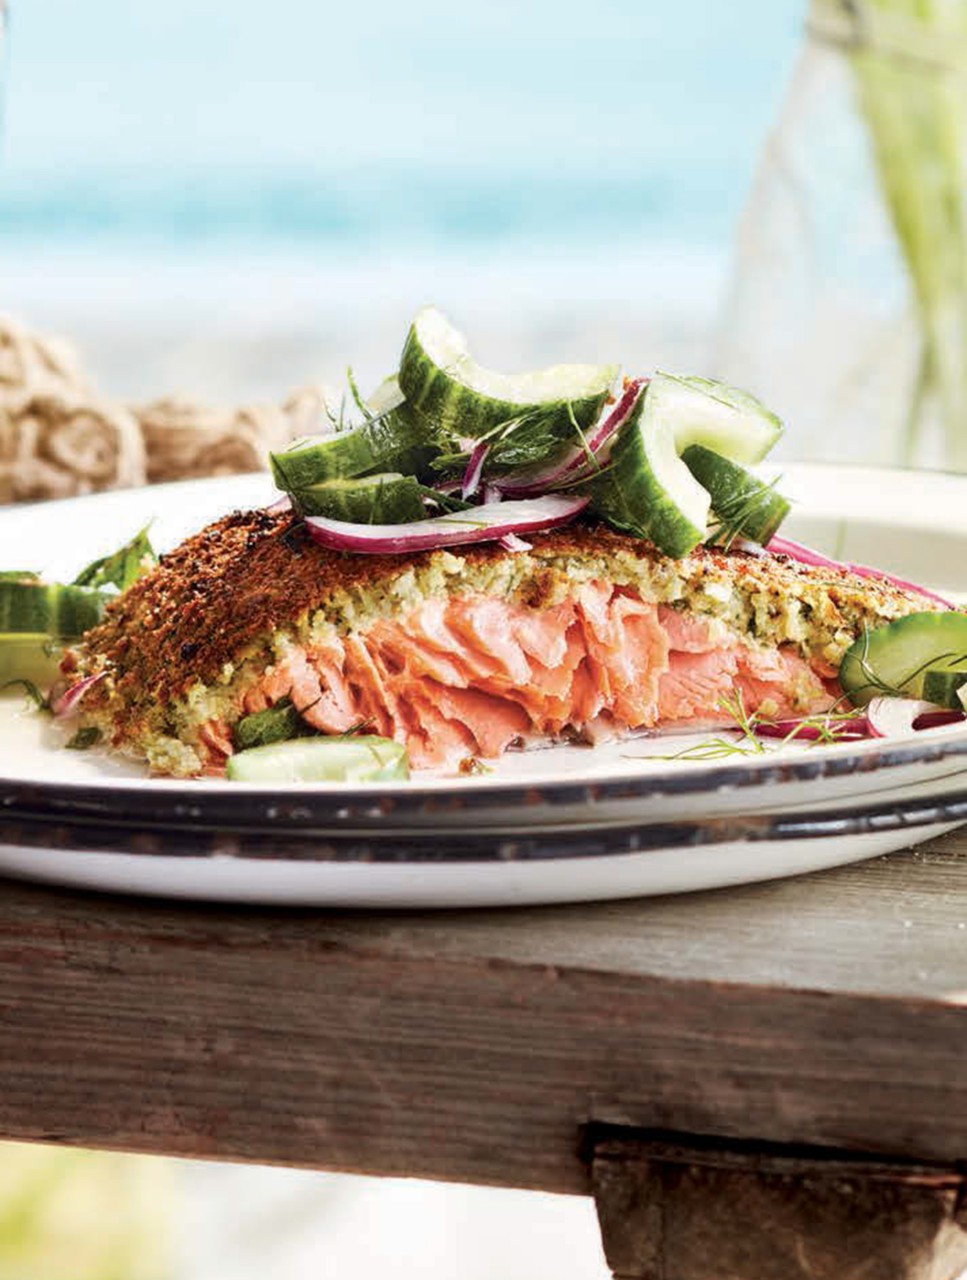 Falafel-Crusted Salmon with Herbed Cucumber Salad